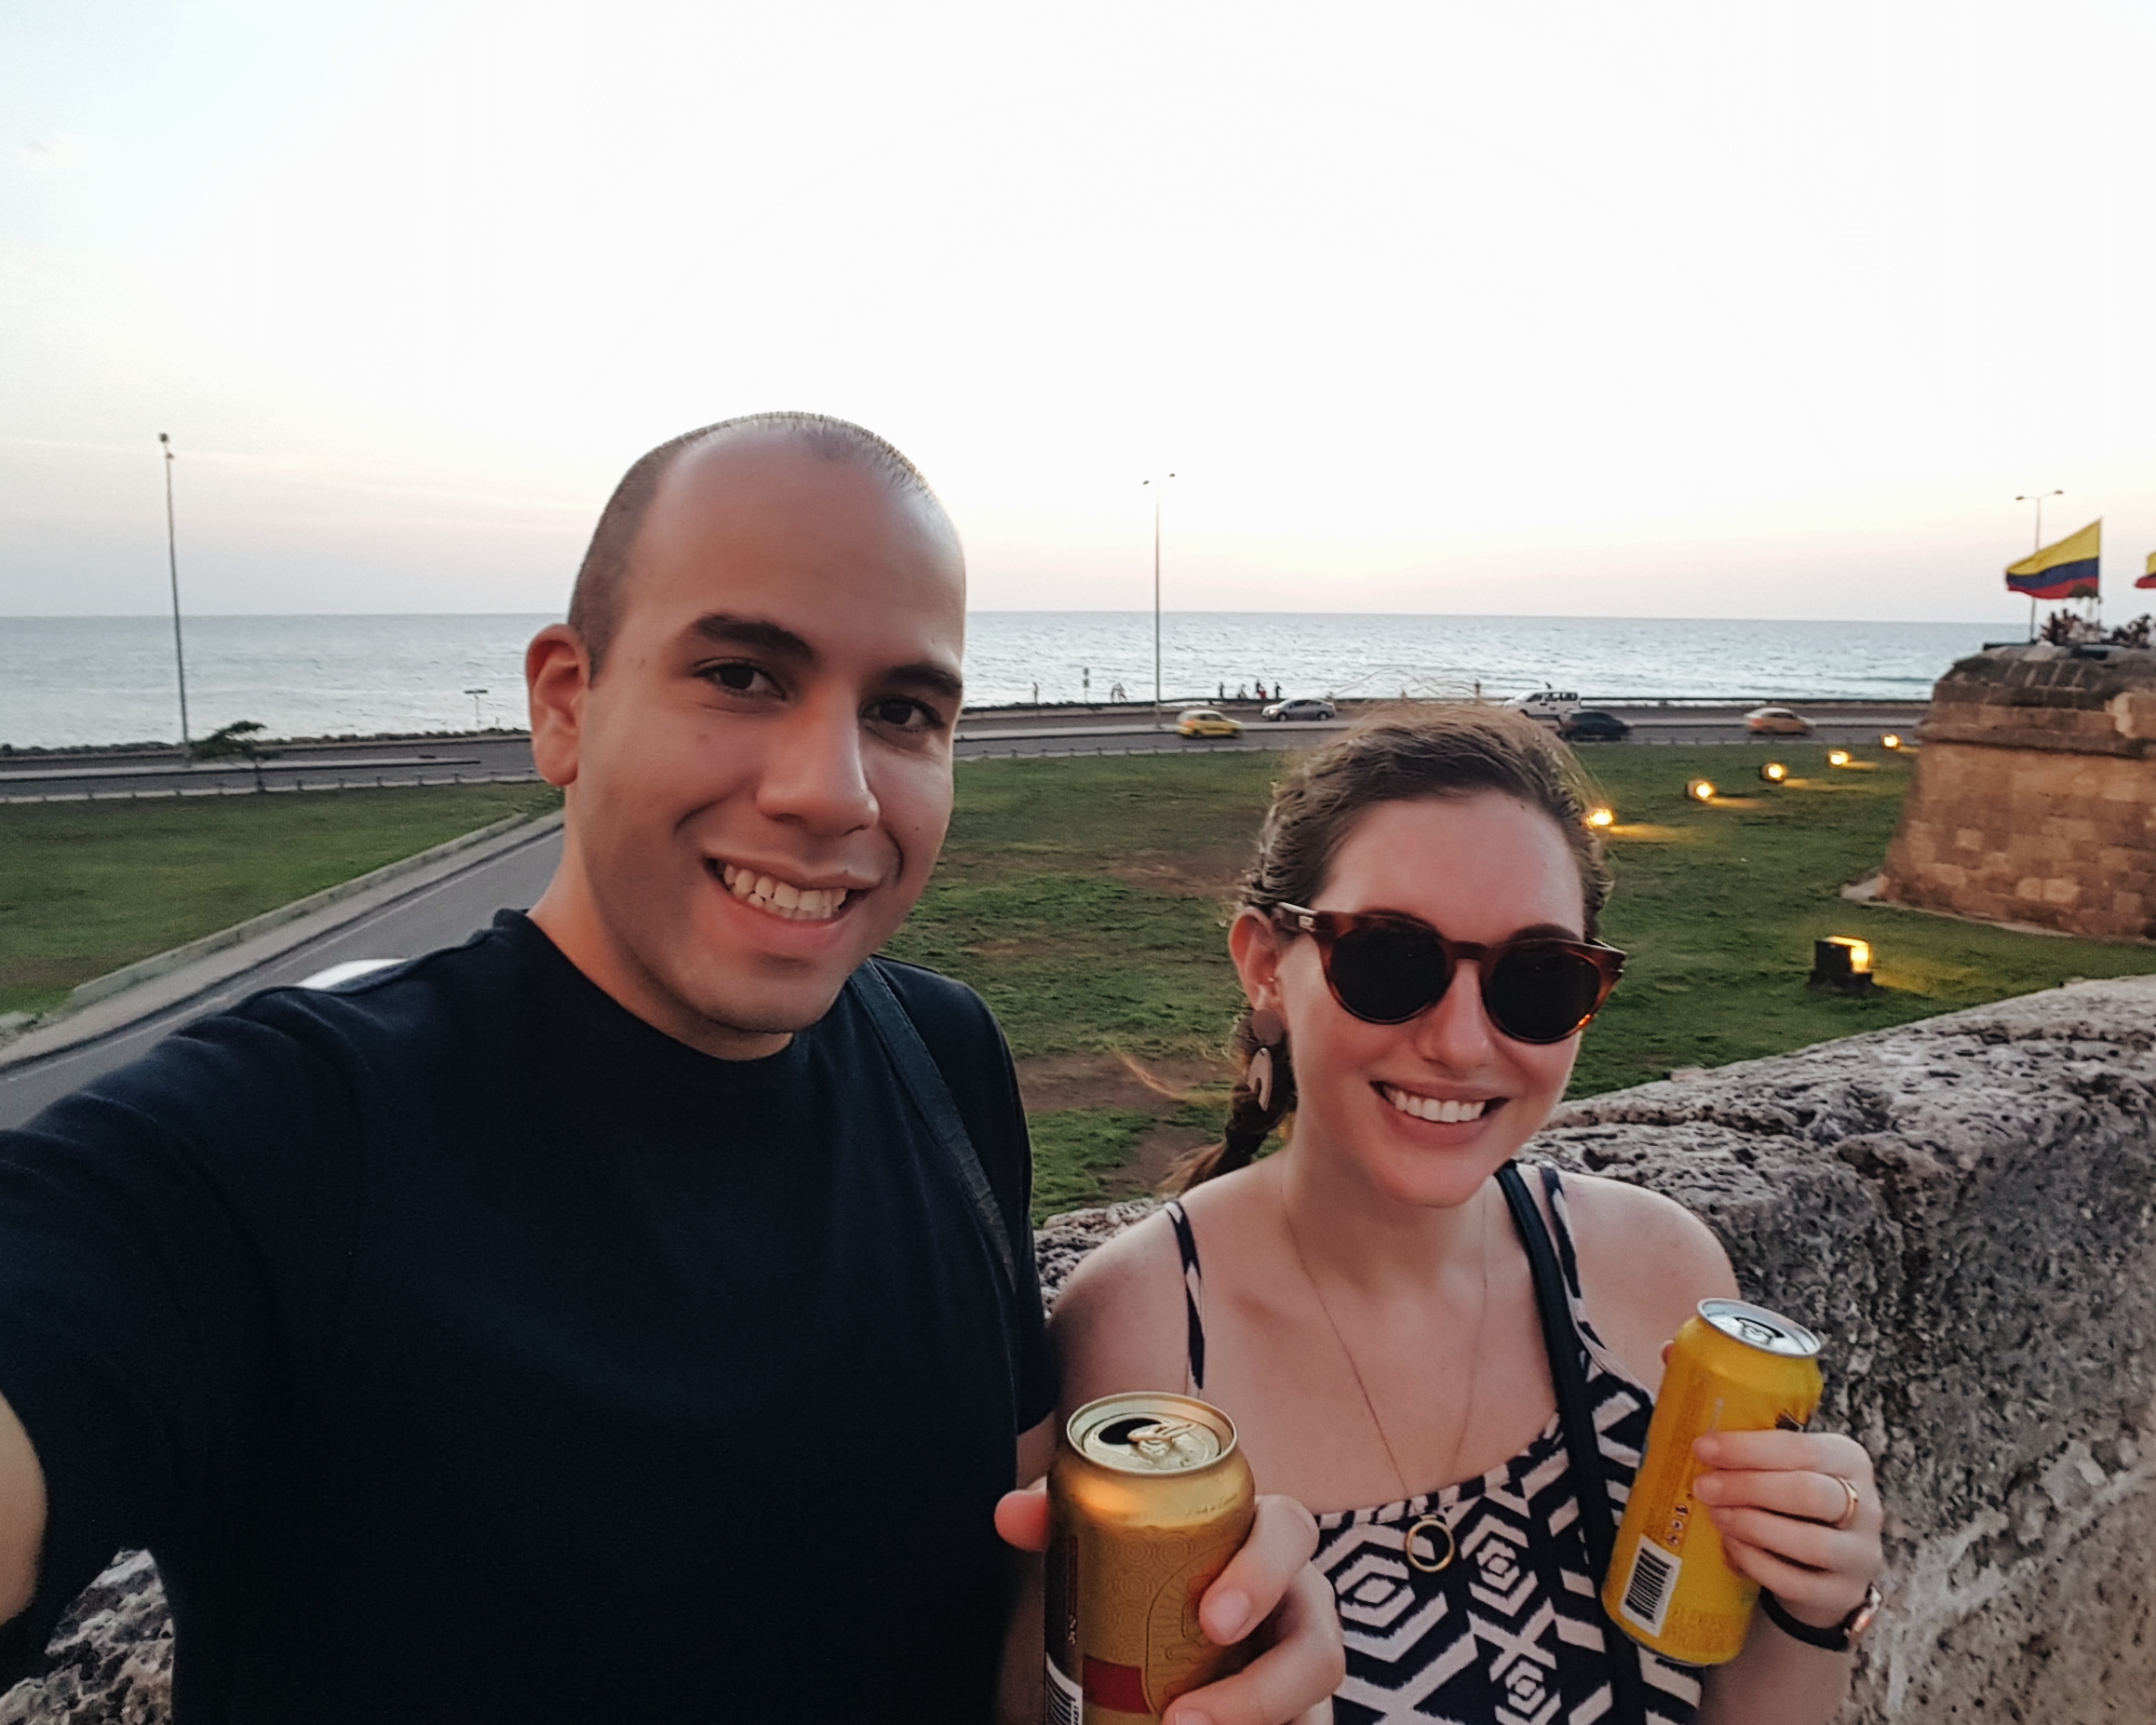 Krystal and Michael waiting for the sunset along the walls of the city, and they are each holding a beer. Michael is wearing a dark tee and Krystal is wearing a patterned dress and sunglasses